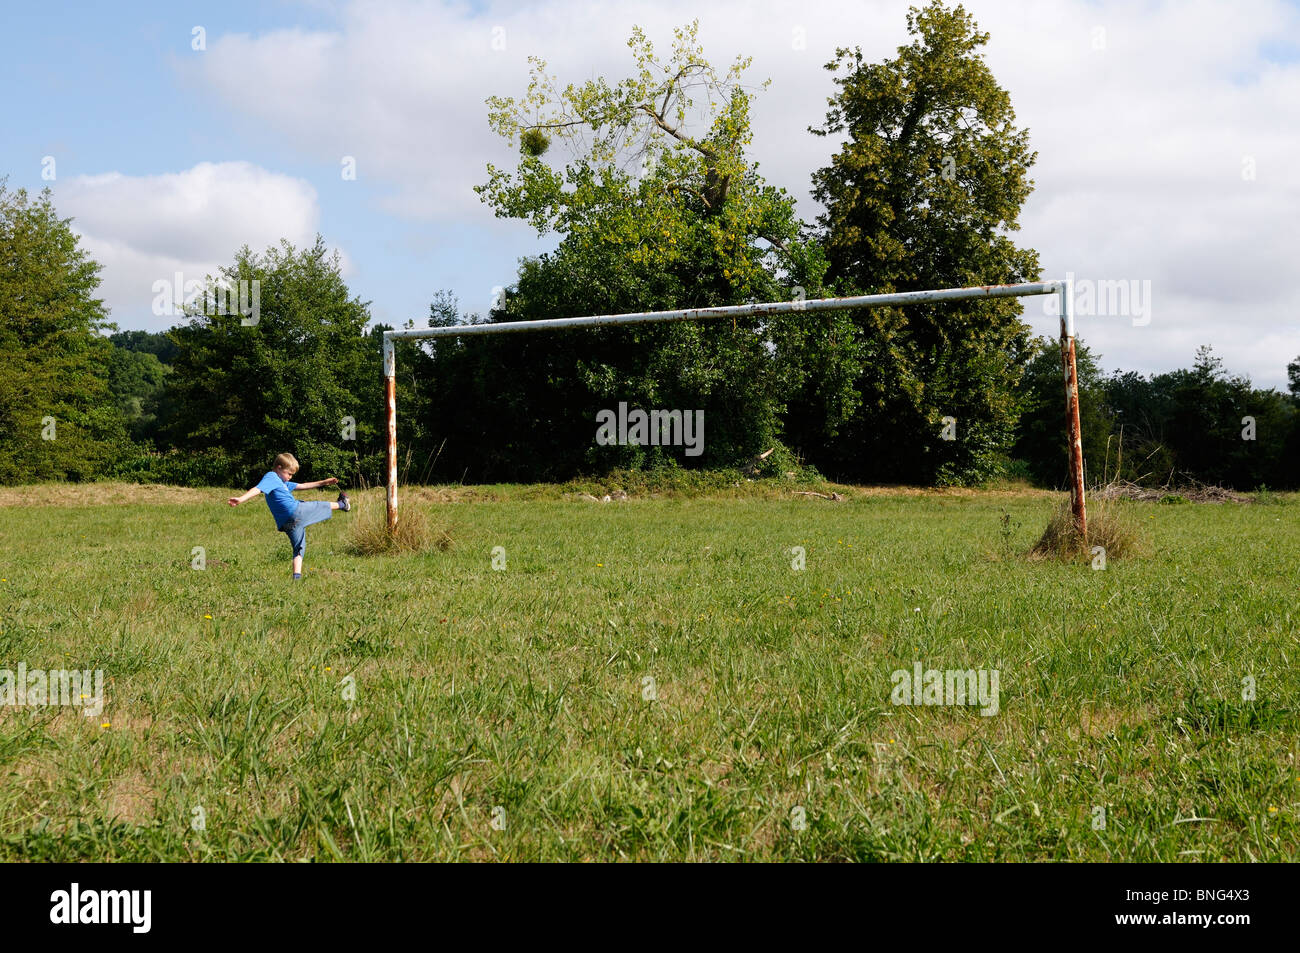 Stock photo of a 10 year old boy pretending to be playing football on an old football field. Stock Photo